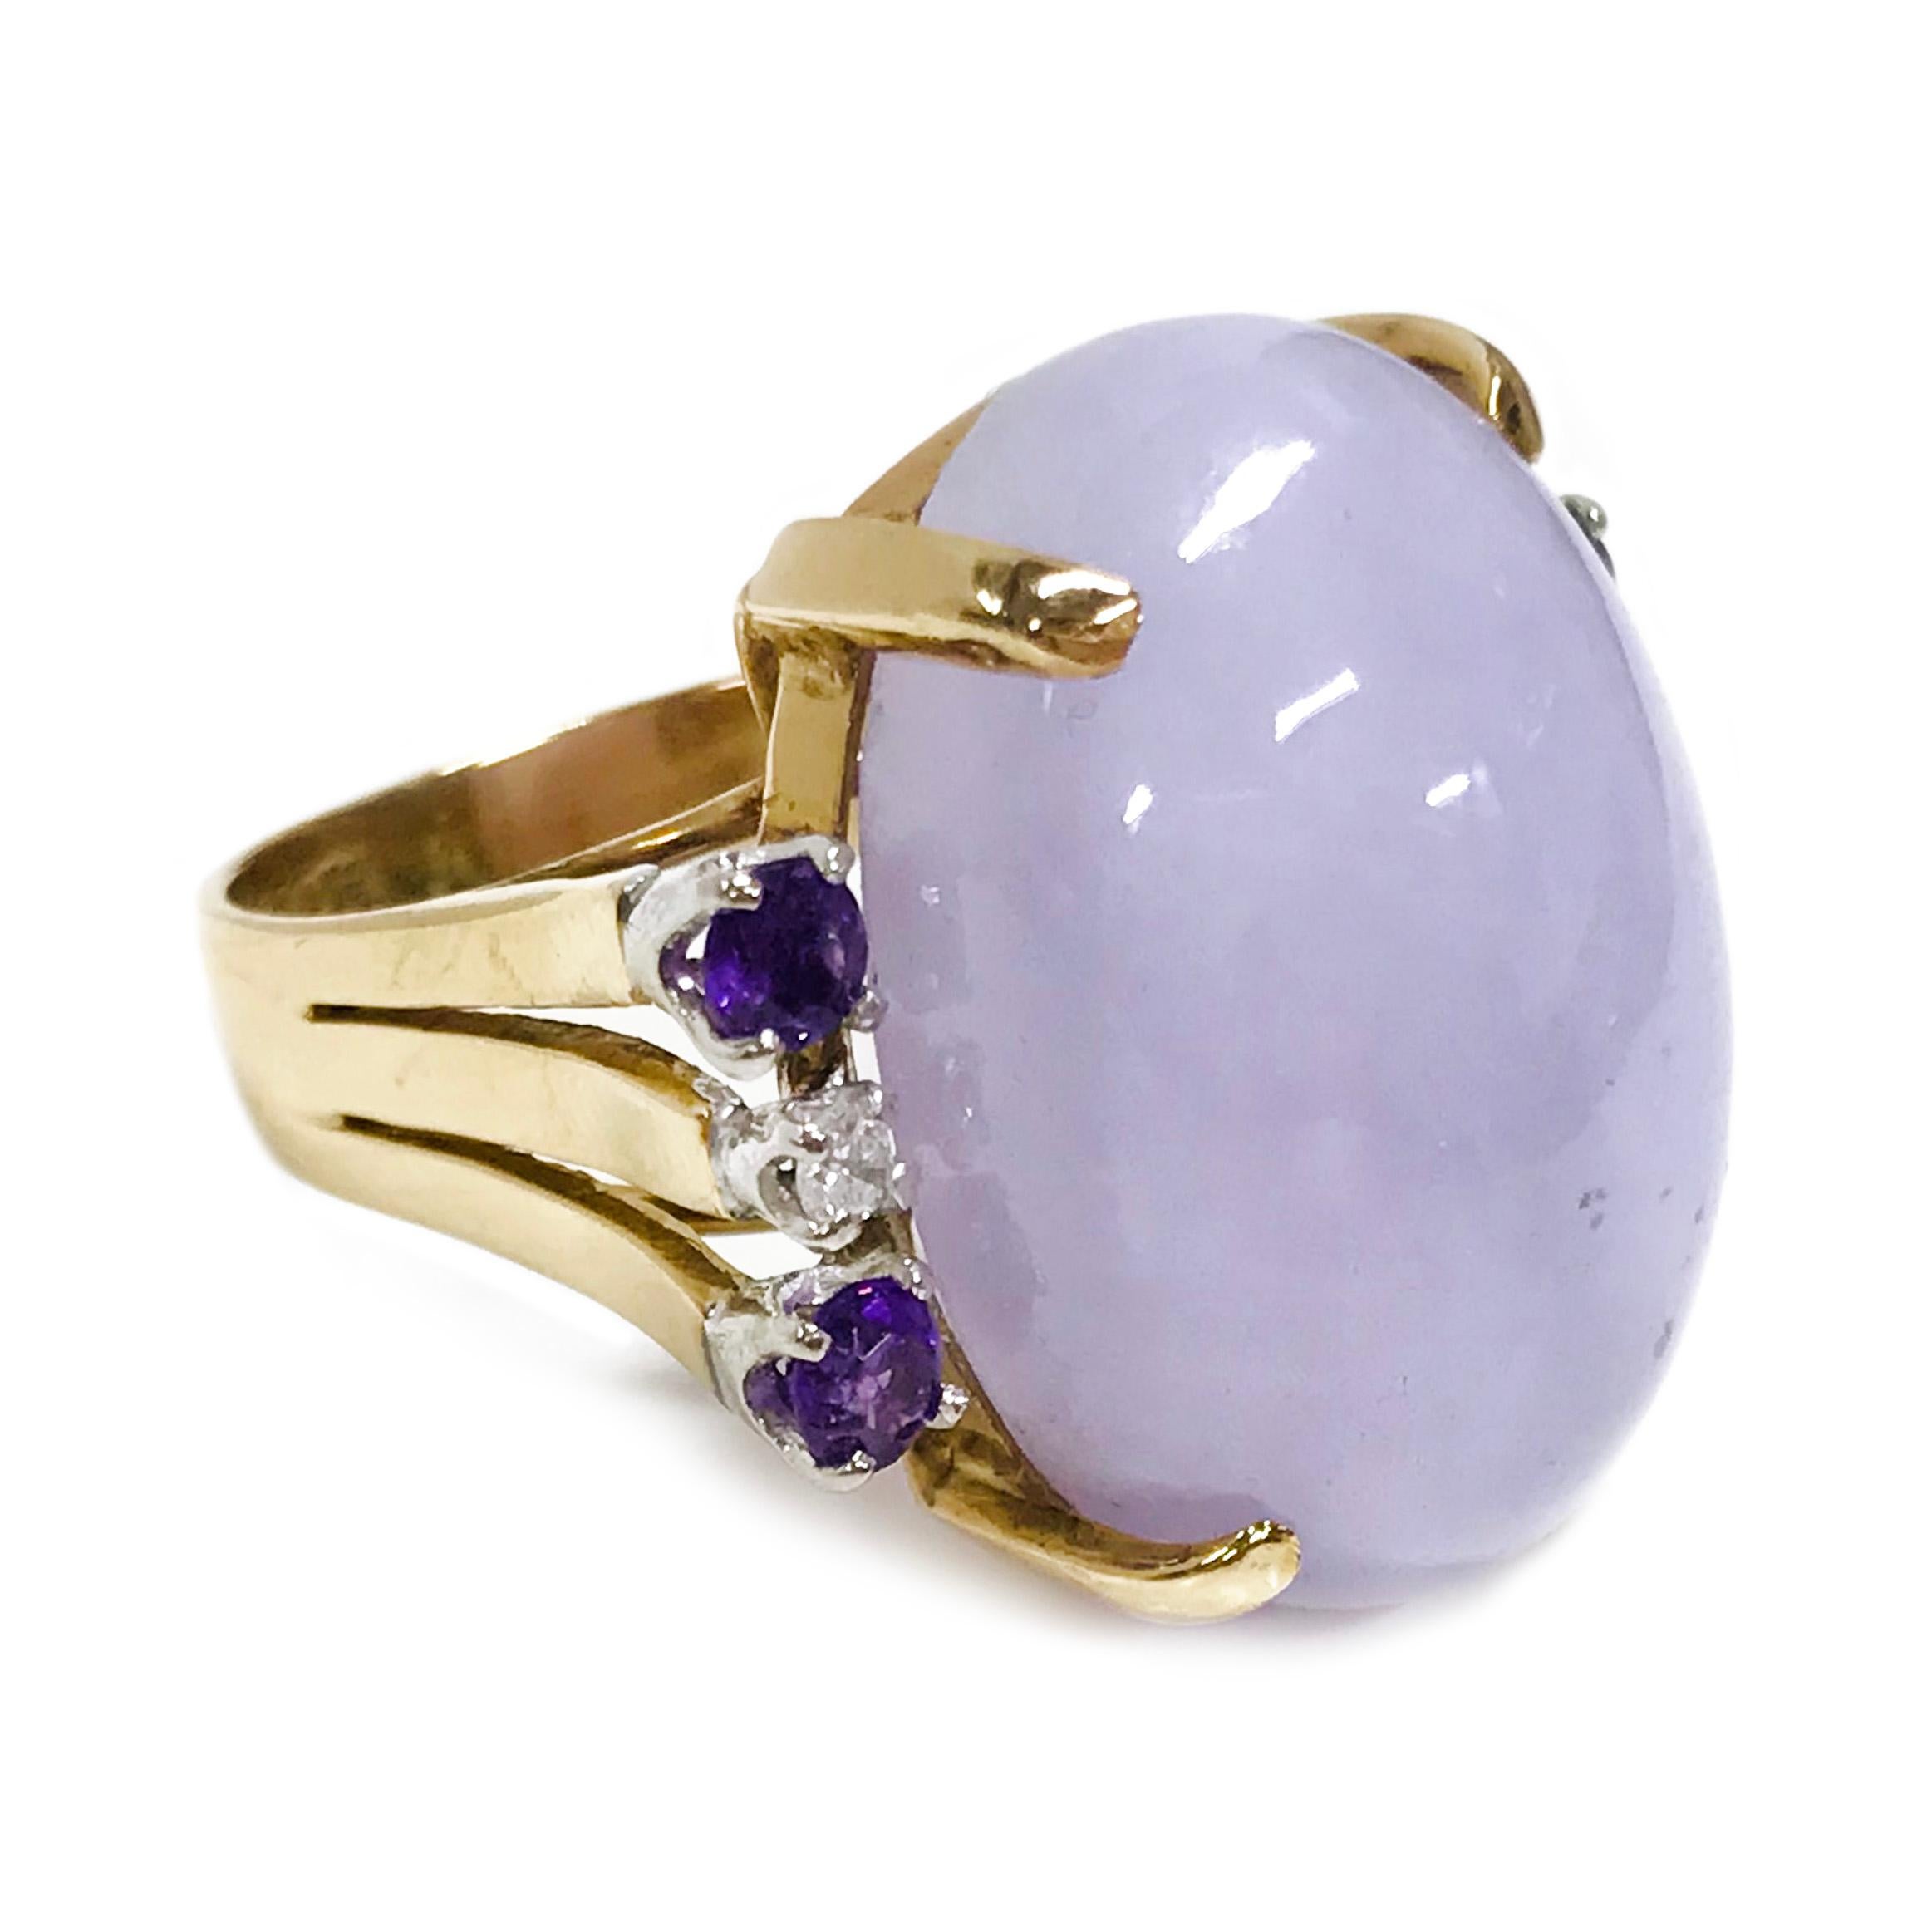 14 Karat Chalcedony Amethyst Diamond Ring. The ring features a large light blue Chalcedony oval cabochon measuring 22 x 16.5mm with four round 3mm Amethyst and two 2.5mm round diamonds, all prong-set. The Amethysts and diamonds are set in white